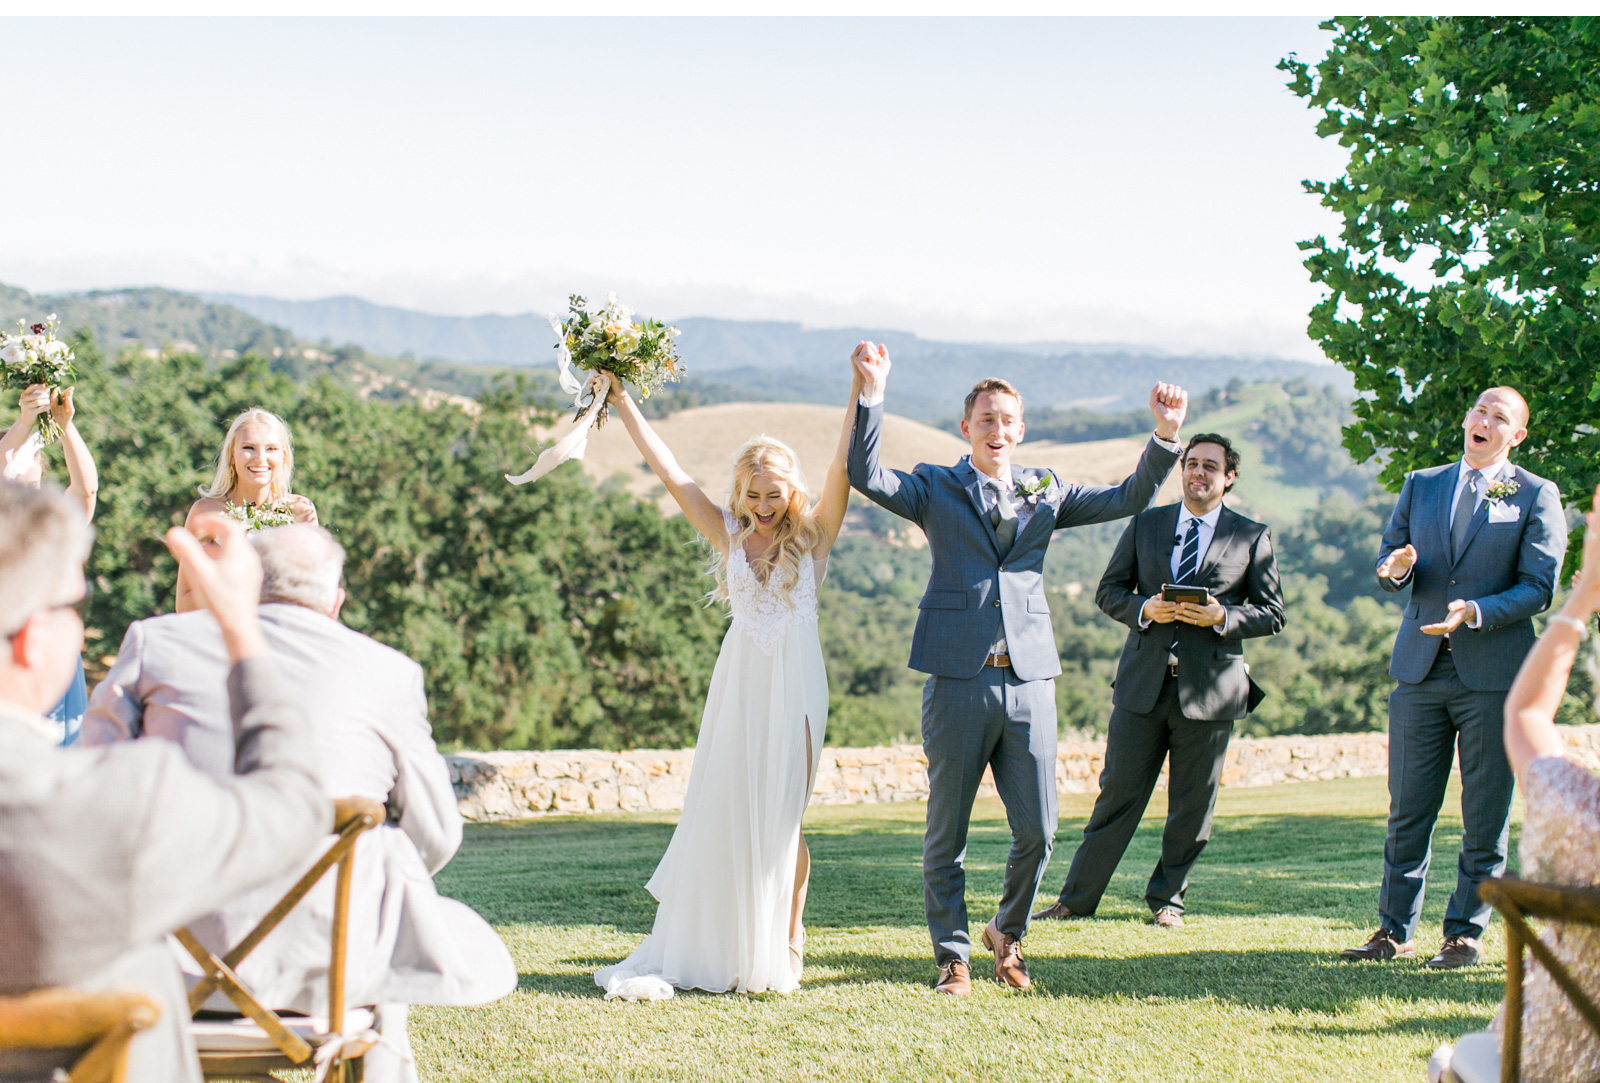 Paso-Robles-Style-Me-Pretty-The-Knot-Wedding-Natalie-Schutt-Photography's-Wedding_10.jpg